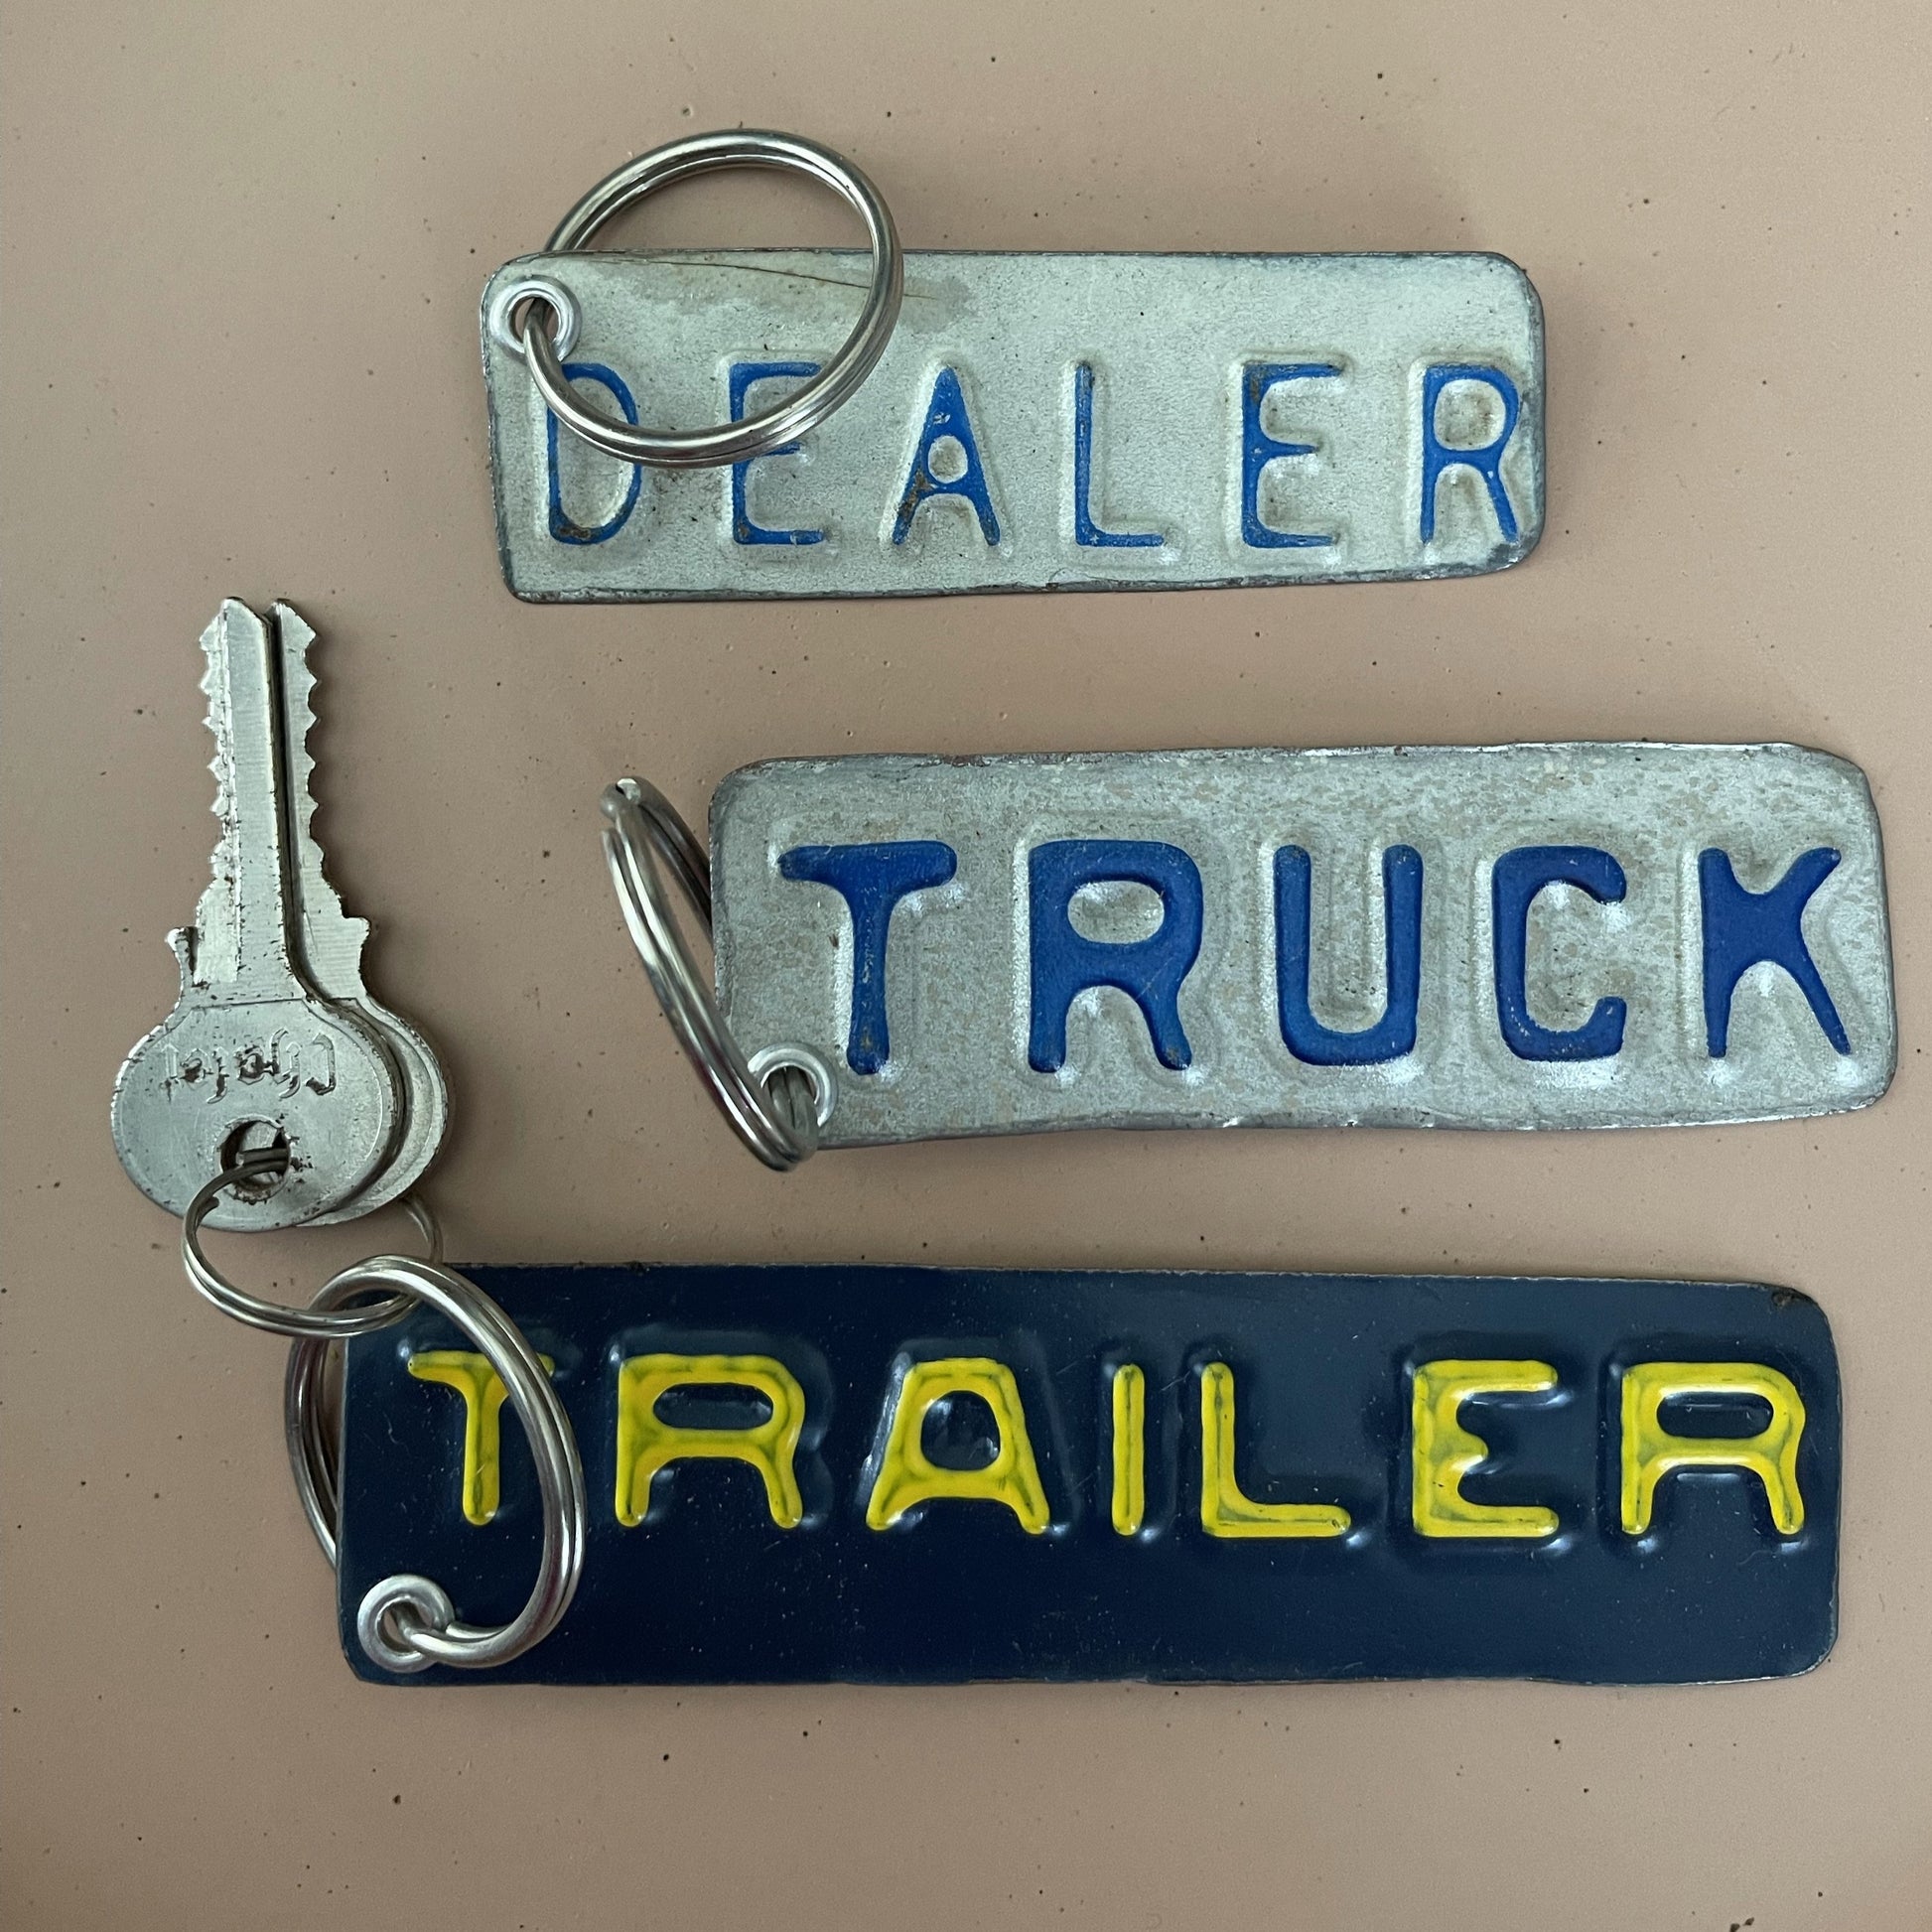 dealer, truck, trailer cut outs from license plate turned into key chains